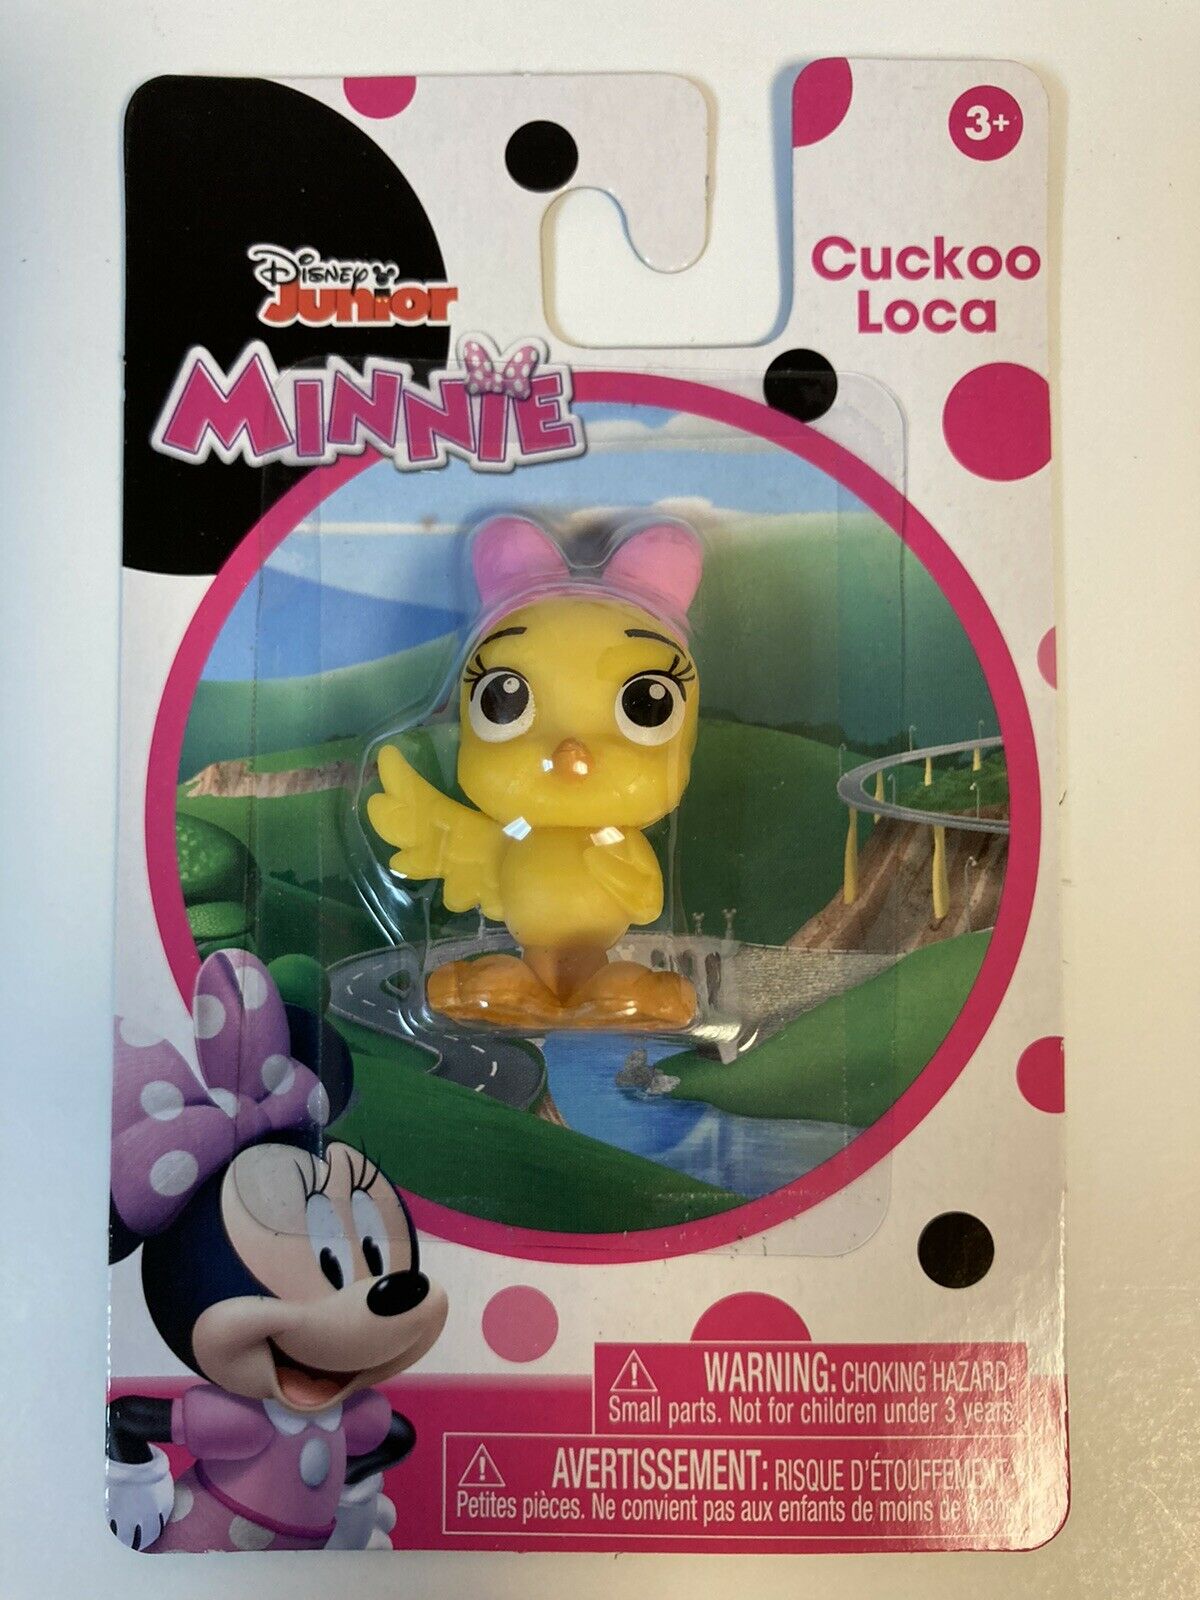 Minnie Mouse Collectible Figure, Figurine/toy, Cuckloo Loca, Pink Bow, 2.0”, New